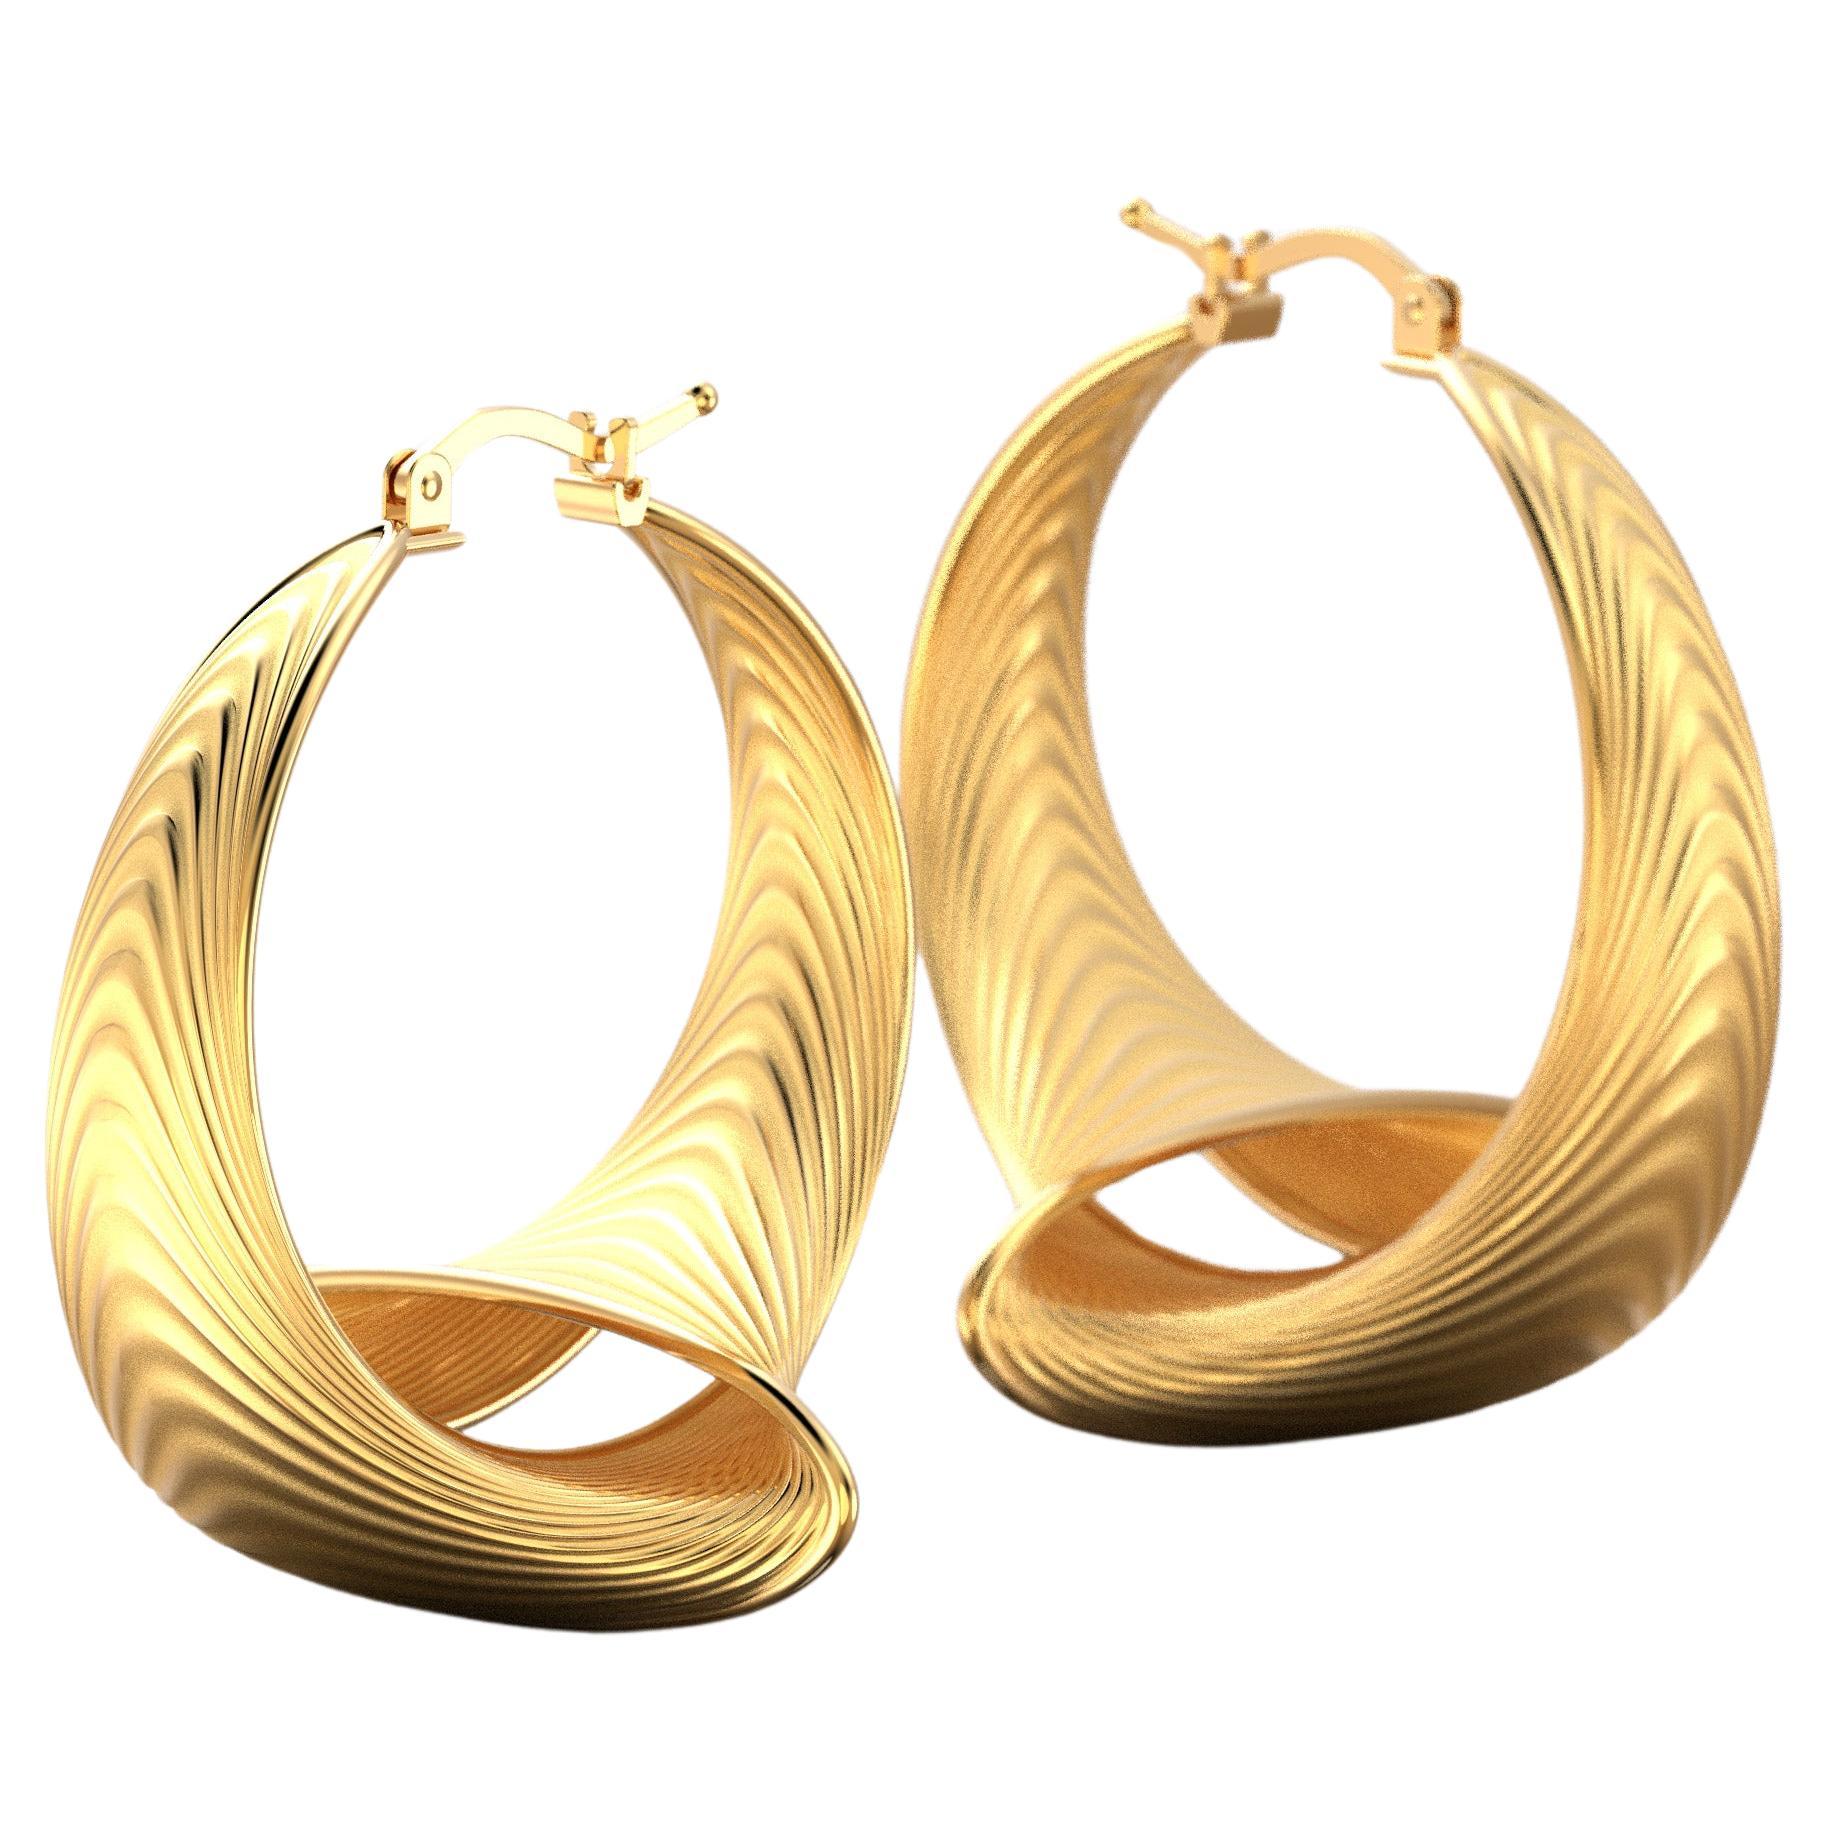 Oltremare Gioielli 18k Gold Hoop Earrings Made in Italy, Italian Gold Jewelry For Sale